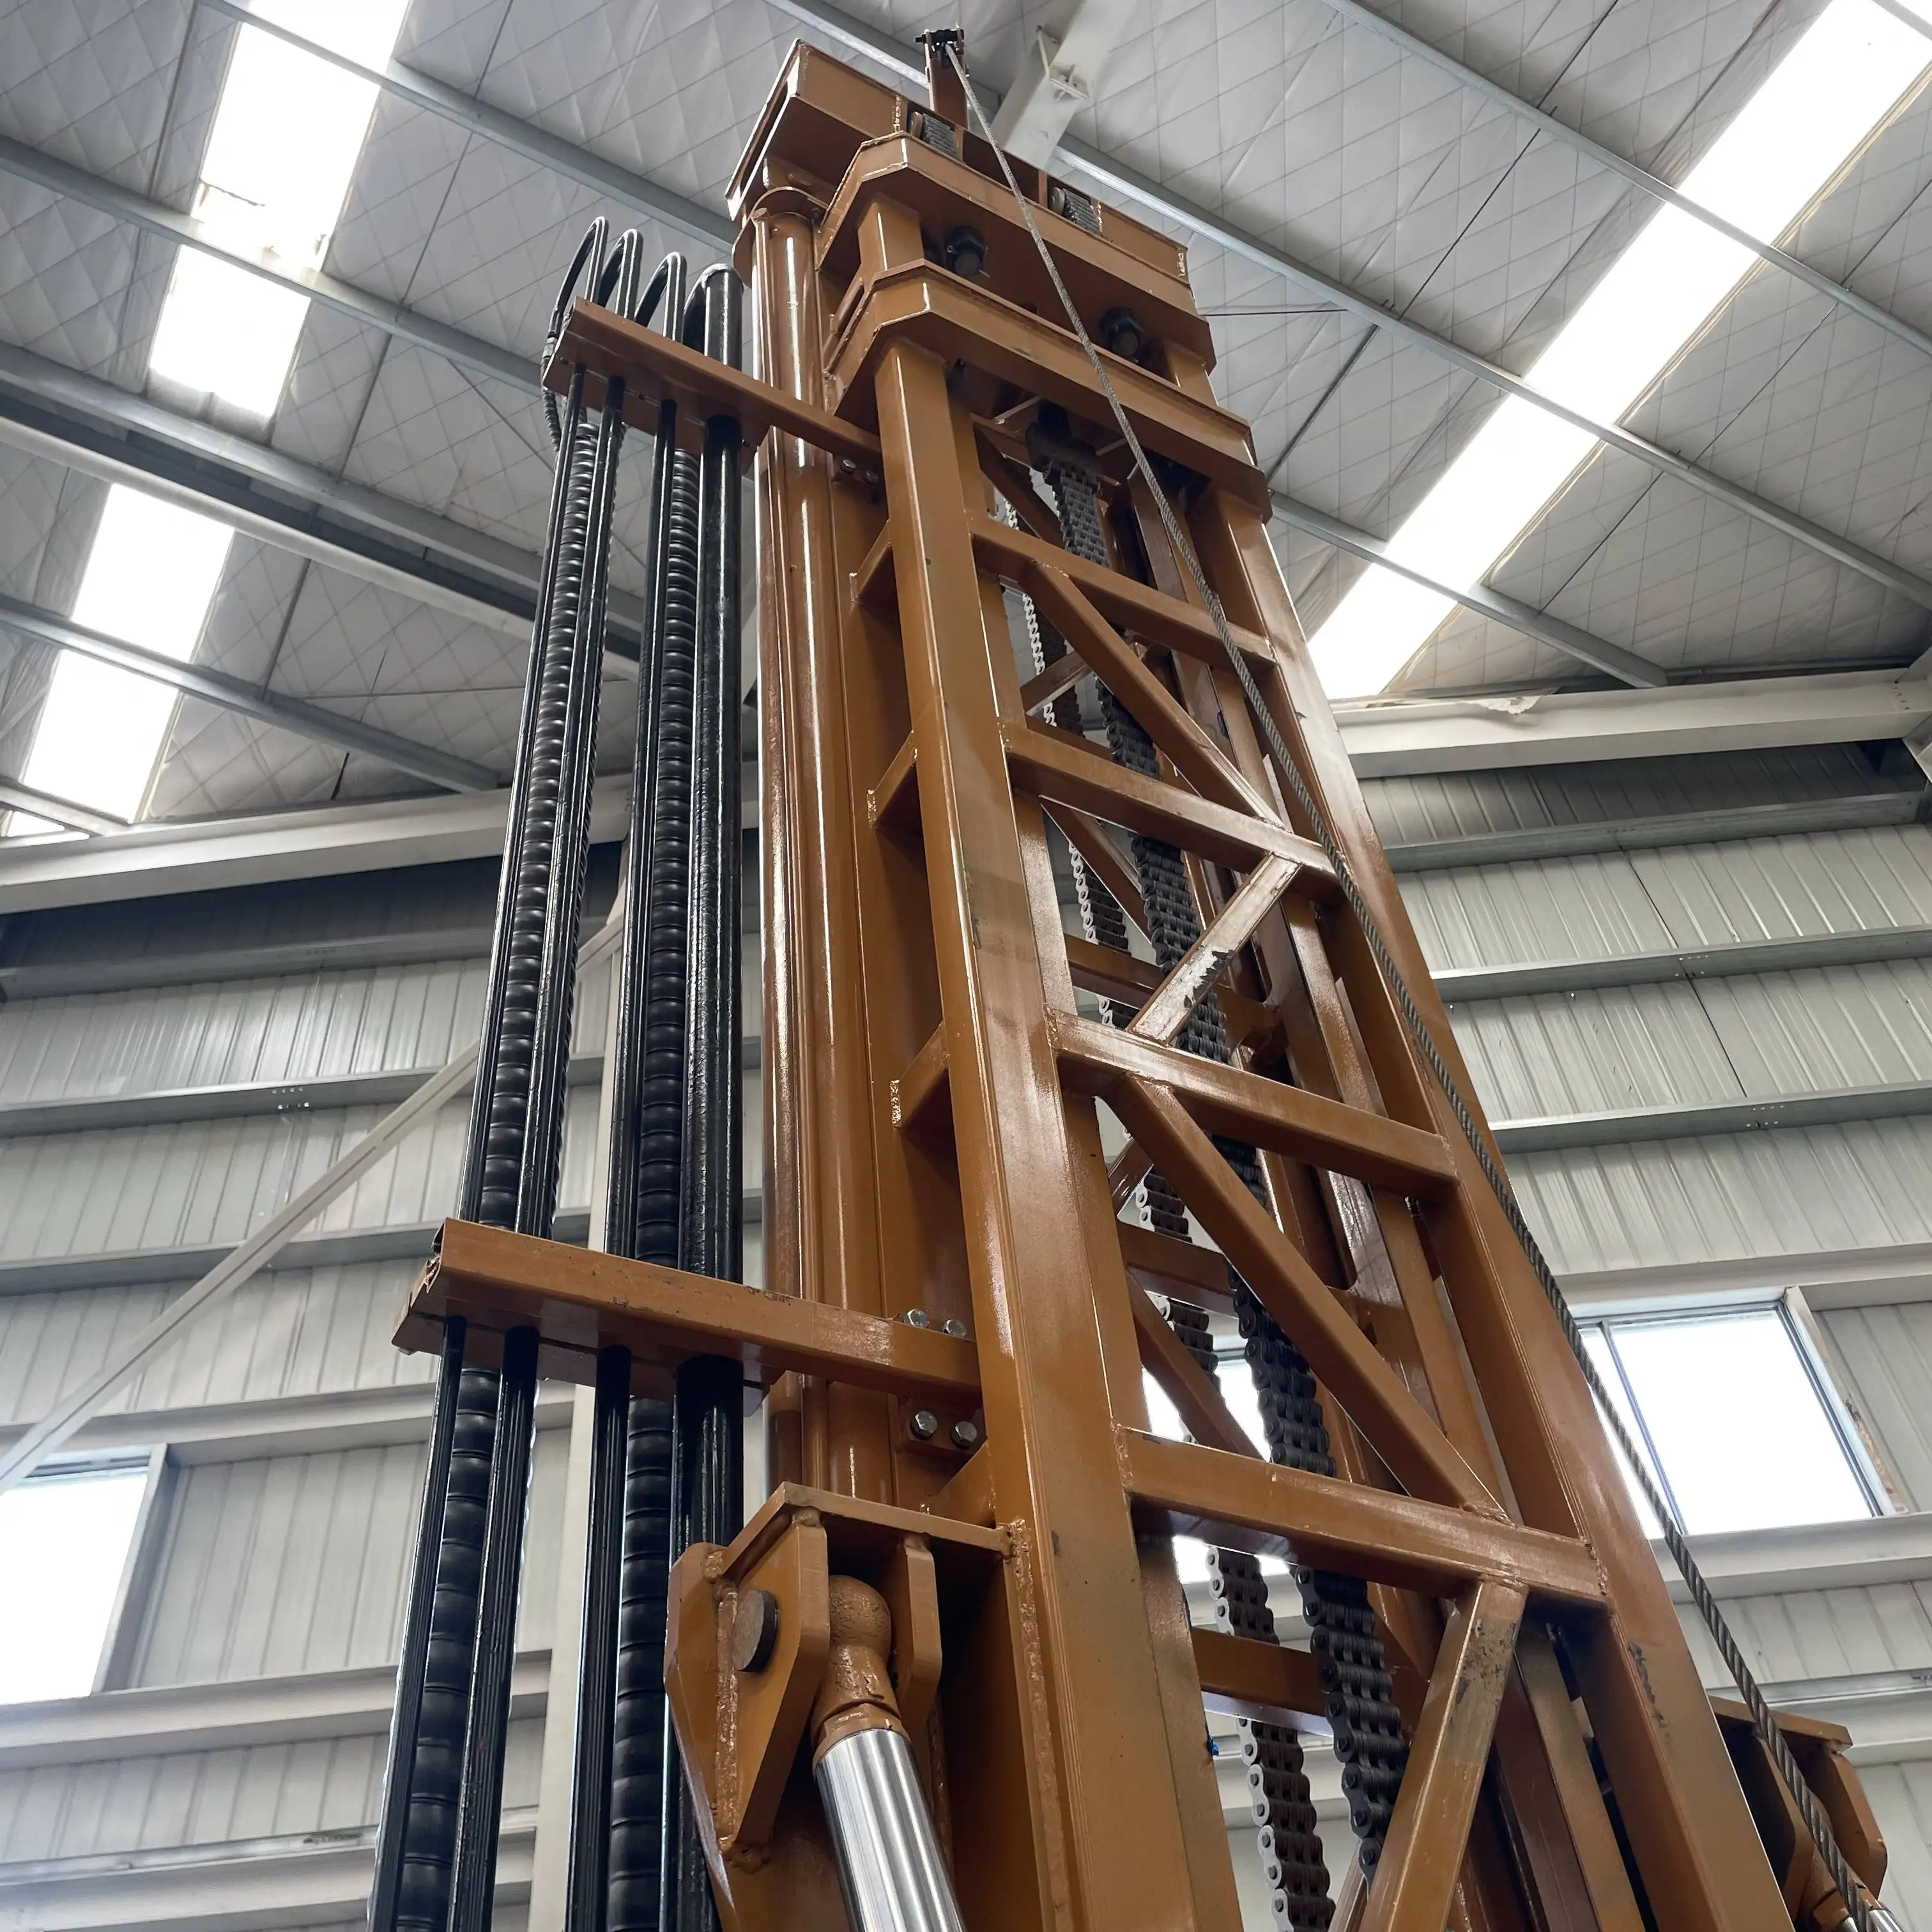 Manufacture 200m Rock Drilling Portable Borehole Drinking HWH200 Water Well Drilling Machine Small Engine Diesel Engine Diesel